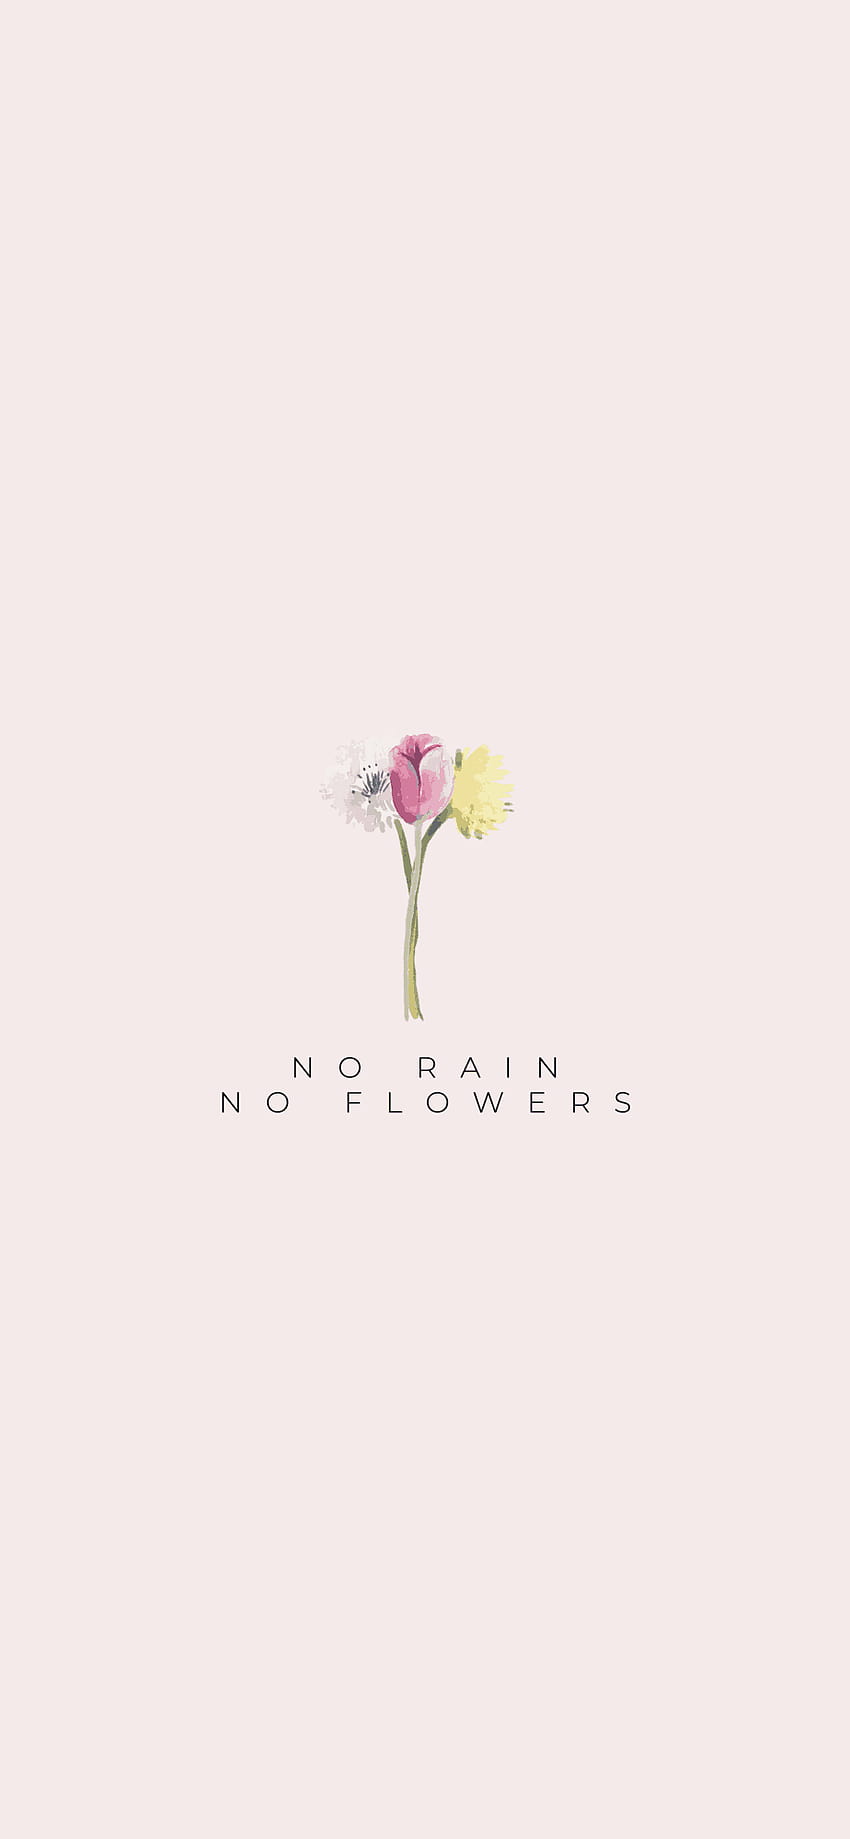 No Rain No Flowers via Krista Smith at ActivateHerAwesome HD phone wallpaper